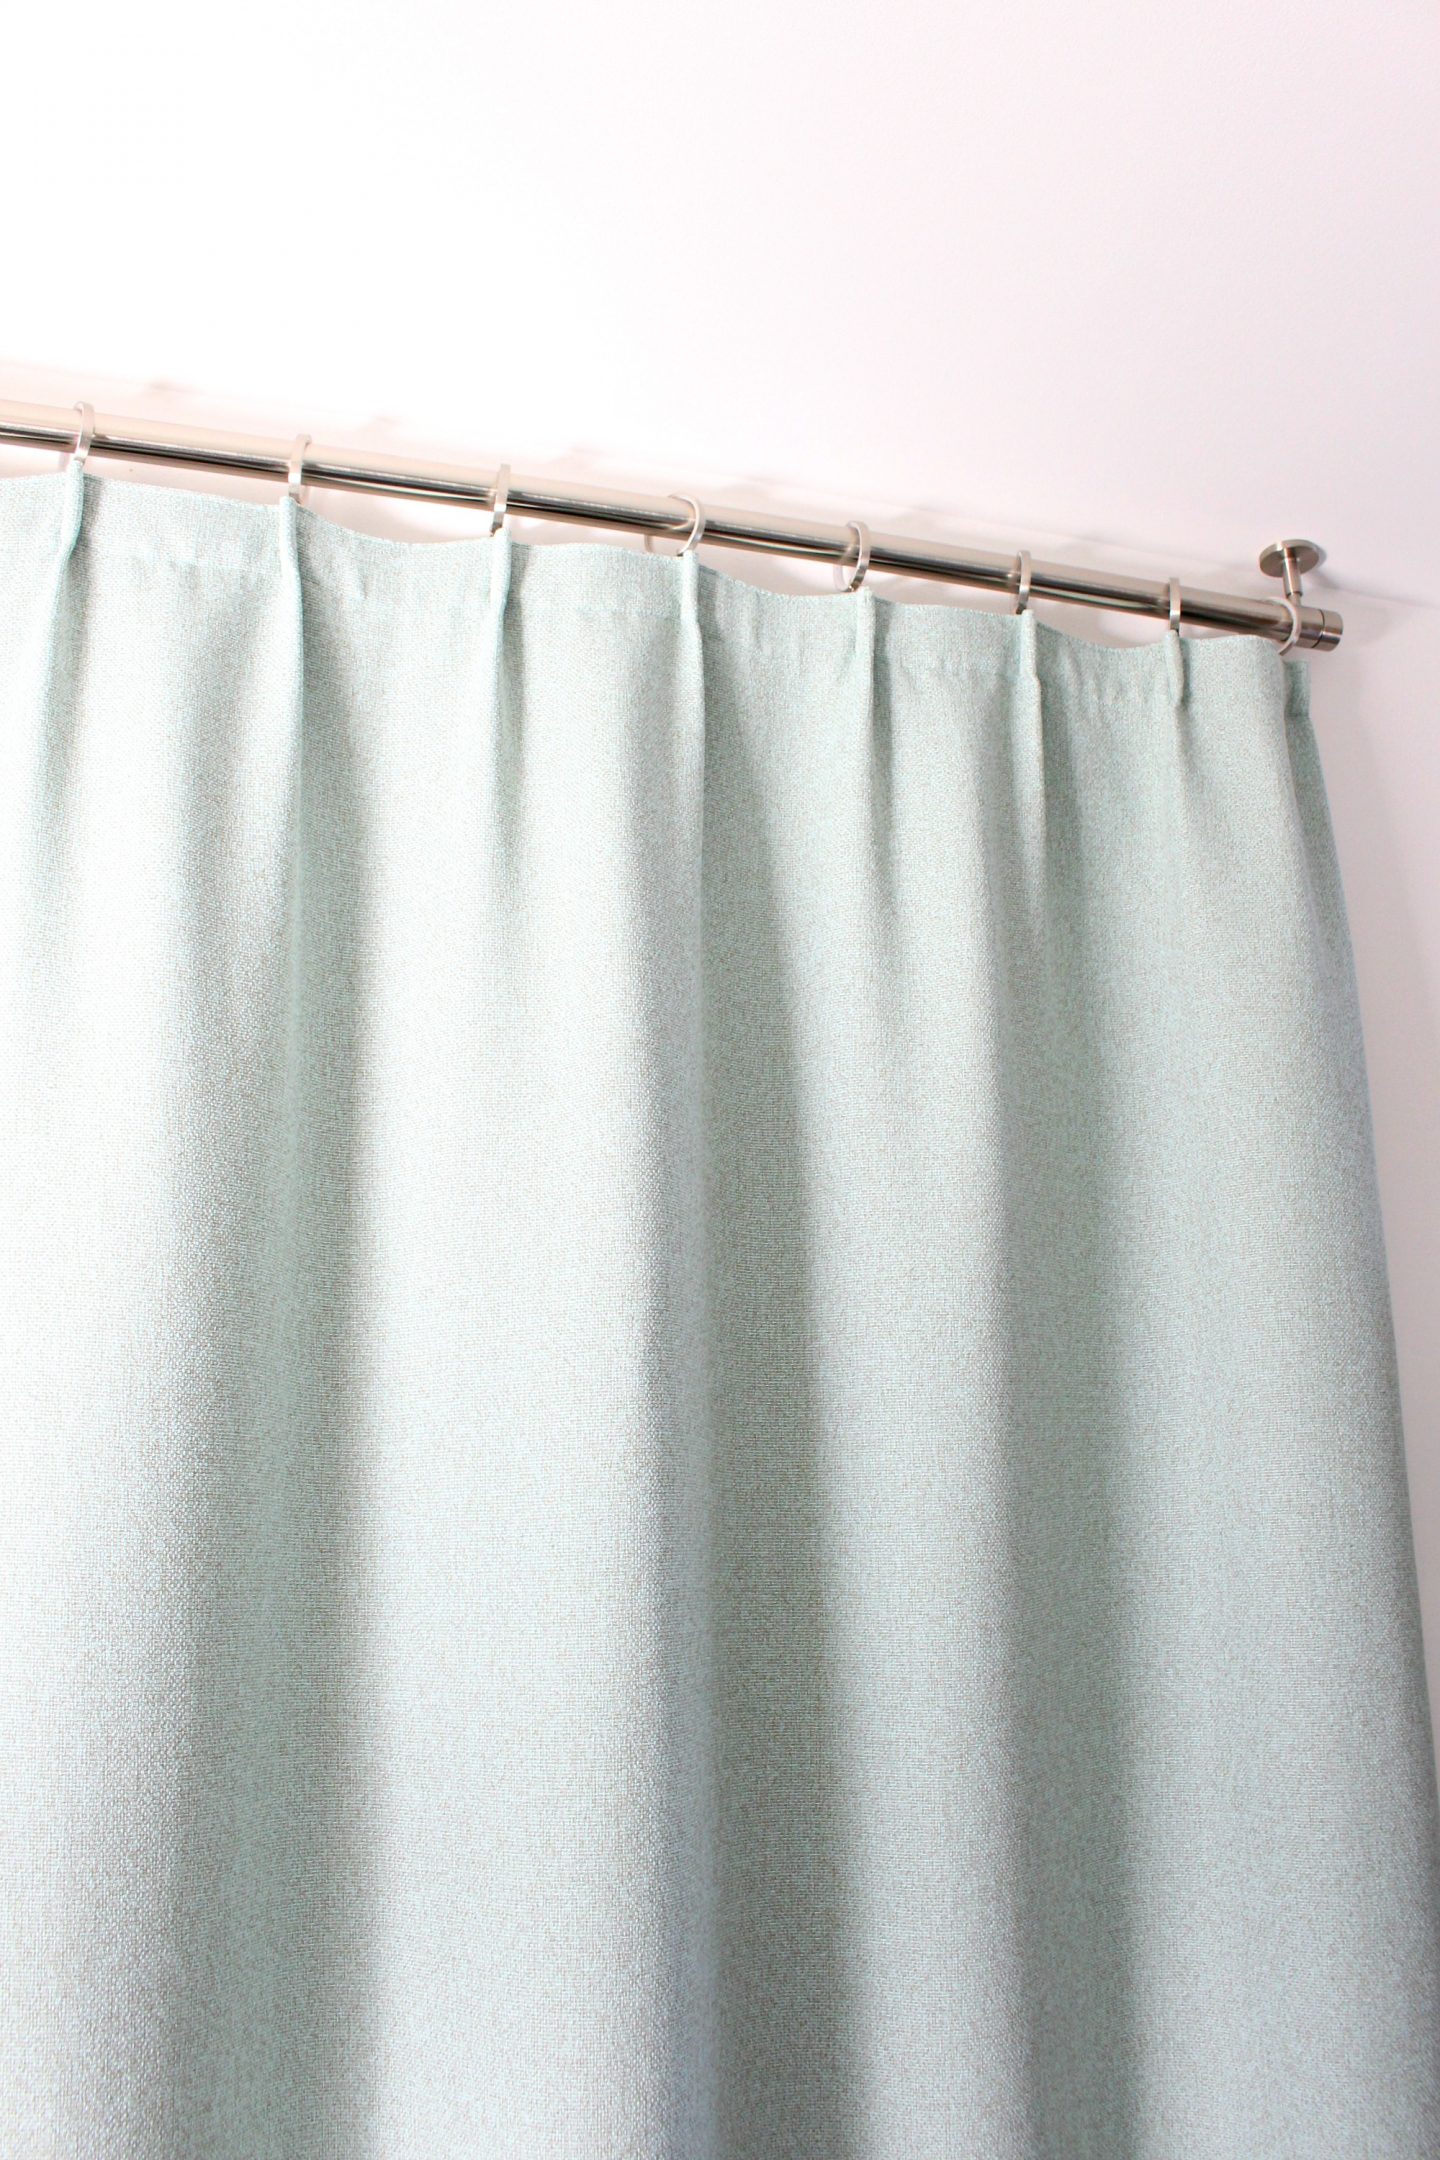 Bathroom Update: Ceiling Mounted Shower Curtain Rod + Turquoise Tweed Pleated Shower Curtain